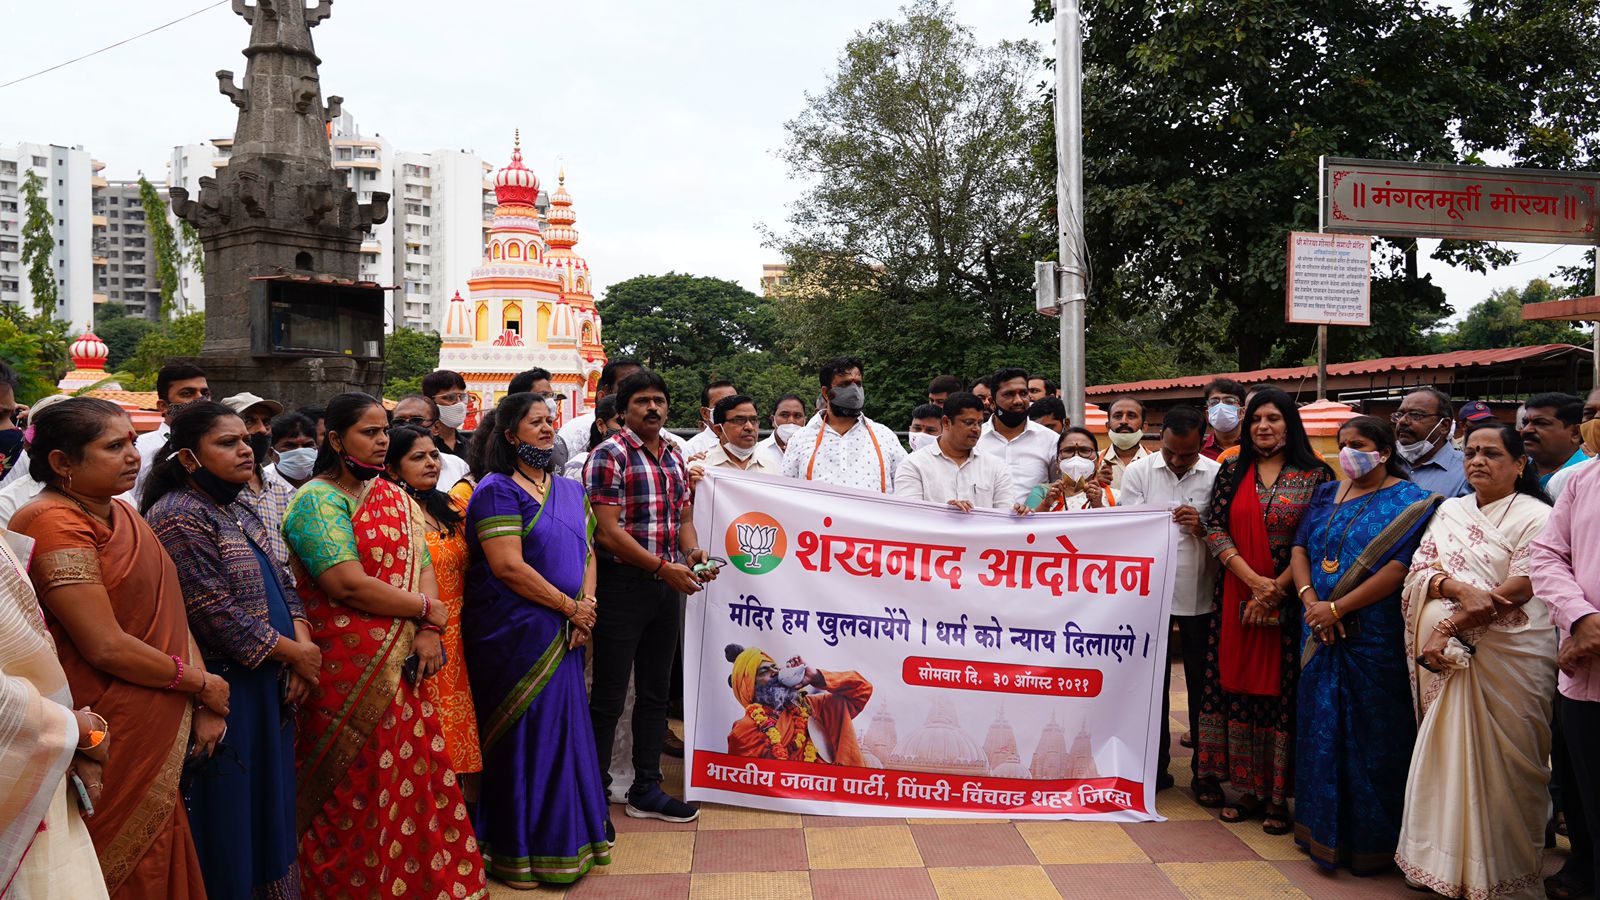 BJP shouts in Pimpri-Chinchwad to open temples!